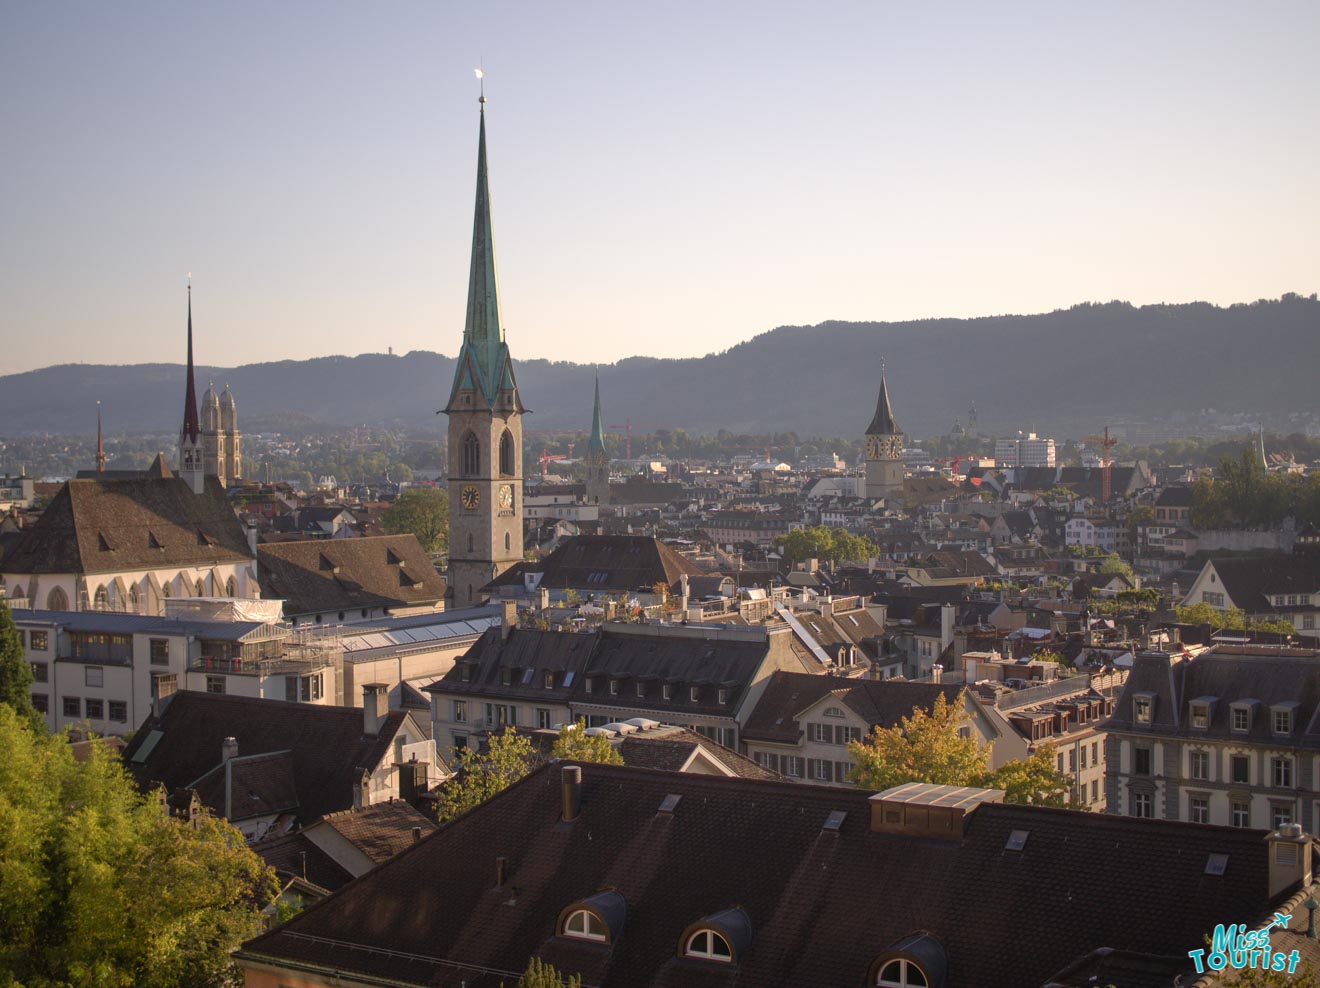 A panoramic view of Zurich's skyline showing the Fraumünster and St. Peter's churches with their iconic clock towers, set against a backdrop of distant hills, under a clear sky at dusk